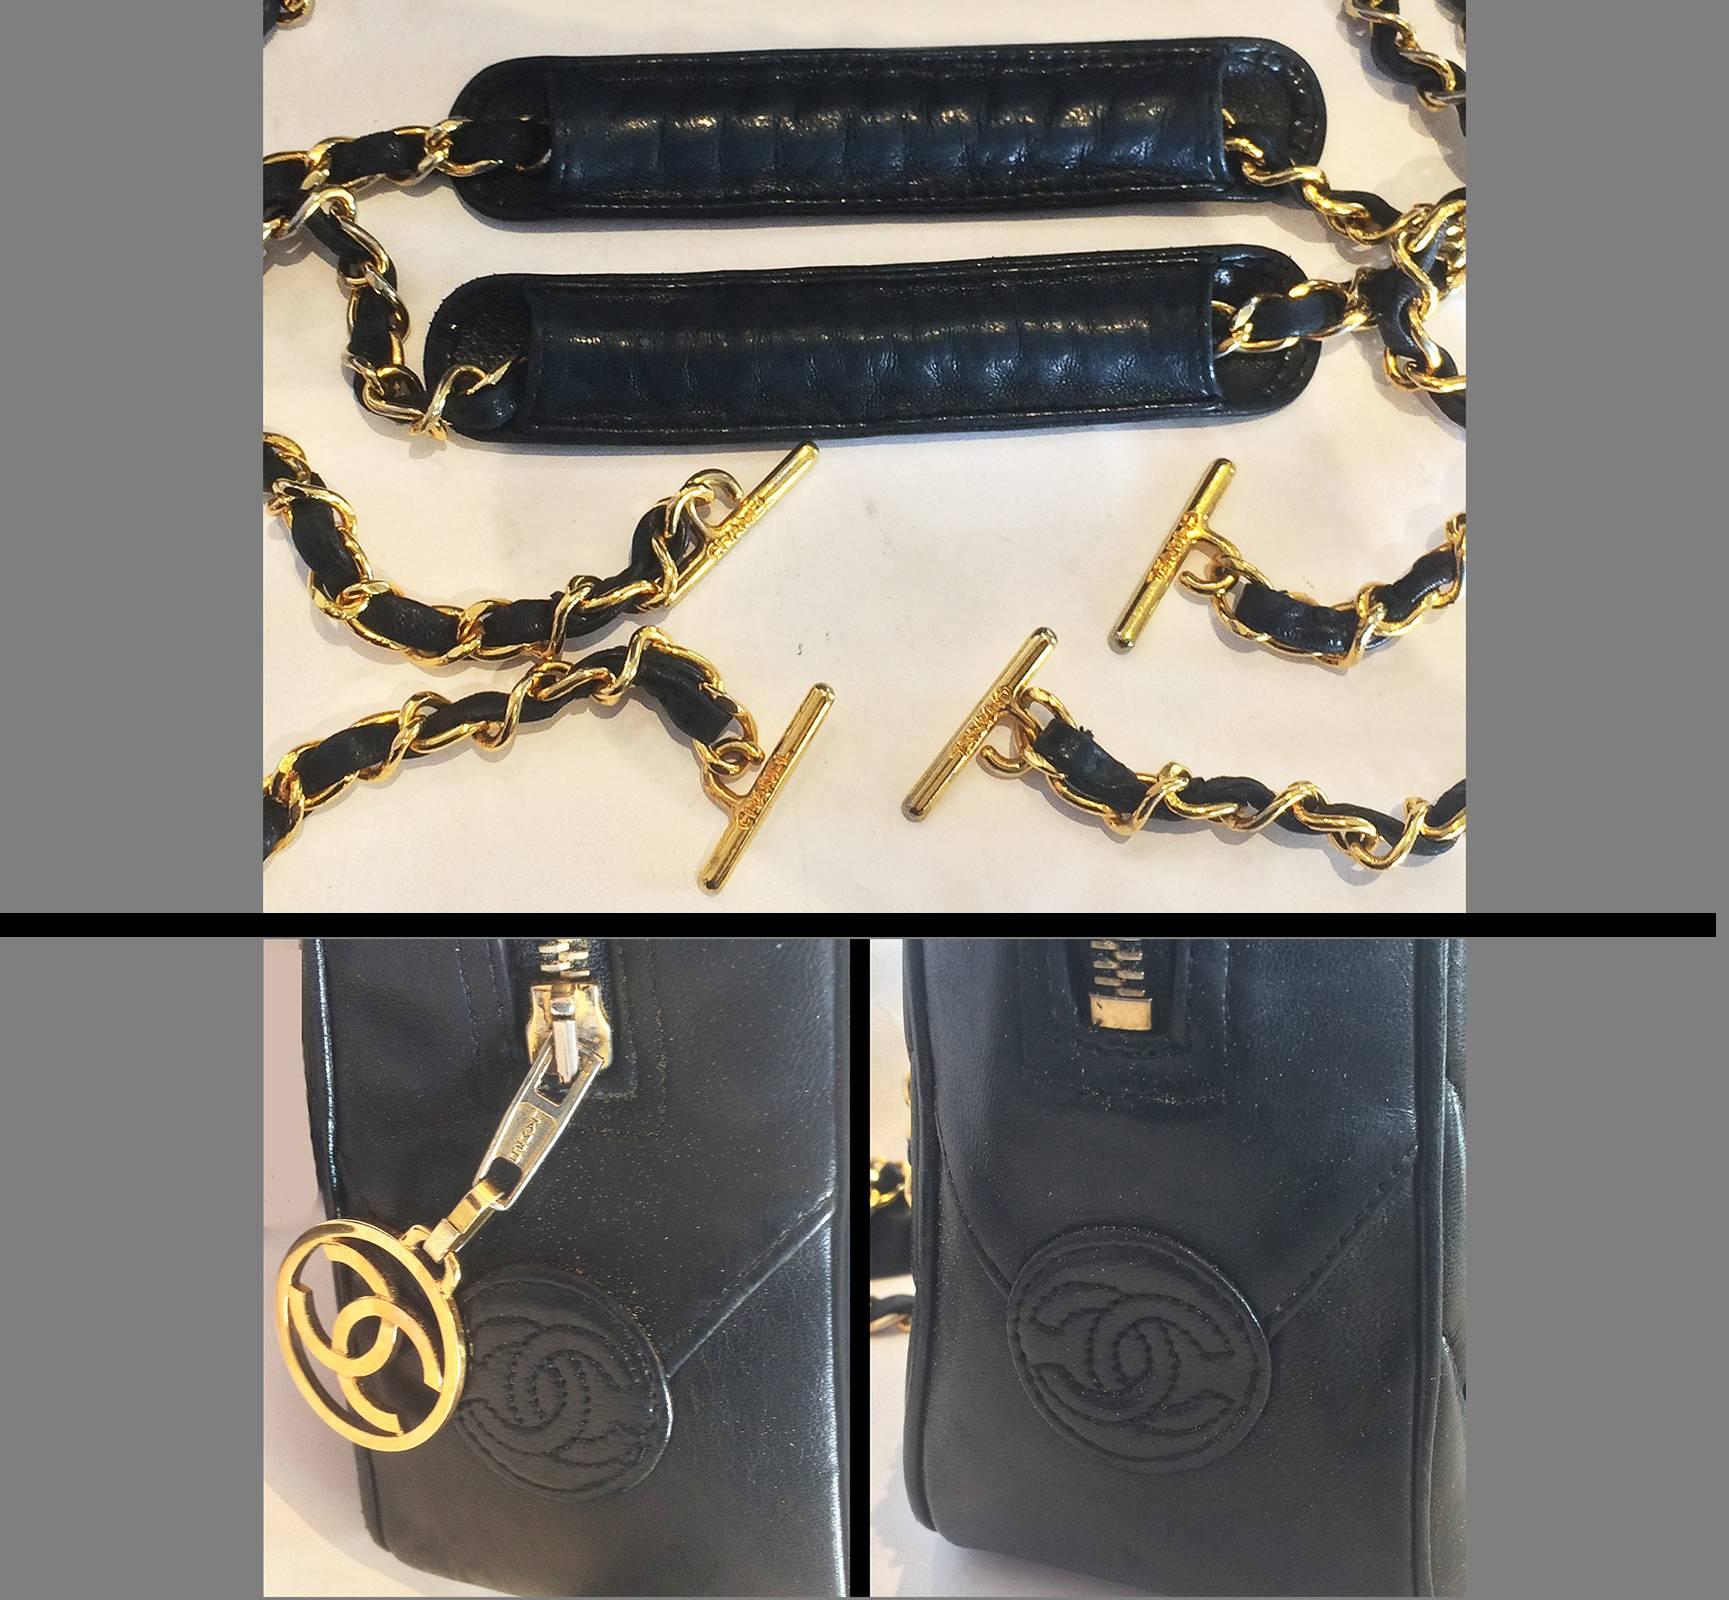 Authentic Chanel Shoulder bag in V Stitch Black leather Handbag In Excellent Condition For Sale In Daylesford, Victoria